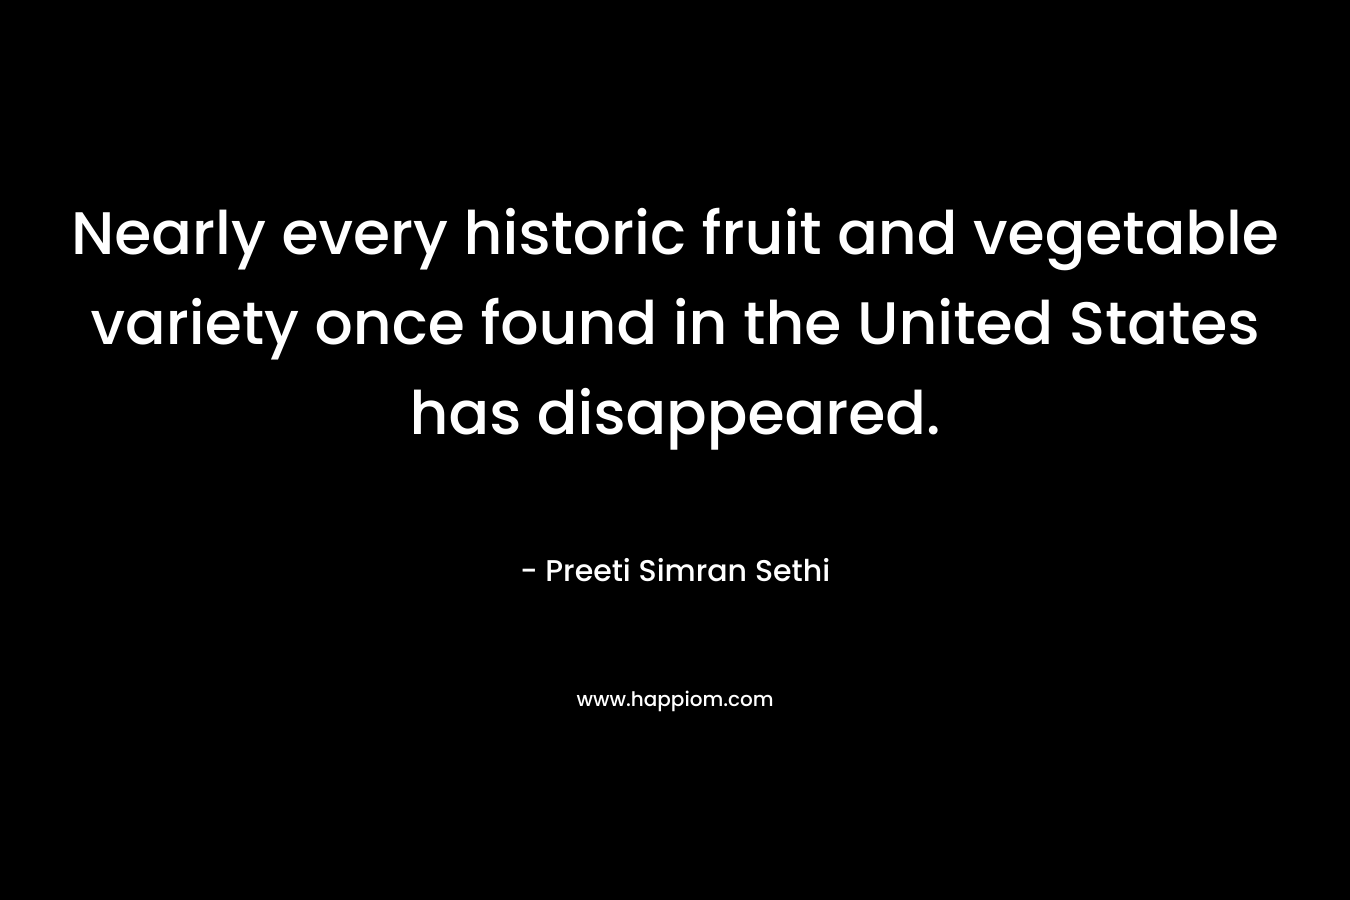 Nearly every historic fruit and vegetable variety once found in the United States has disappeared. – Preeti Simran Sethi